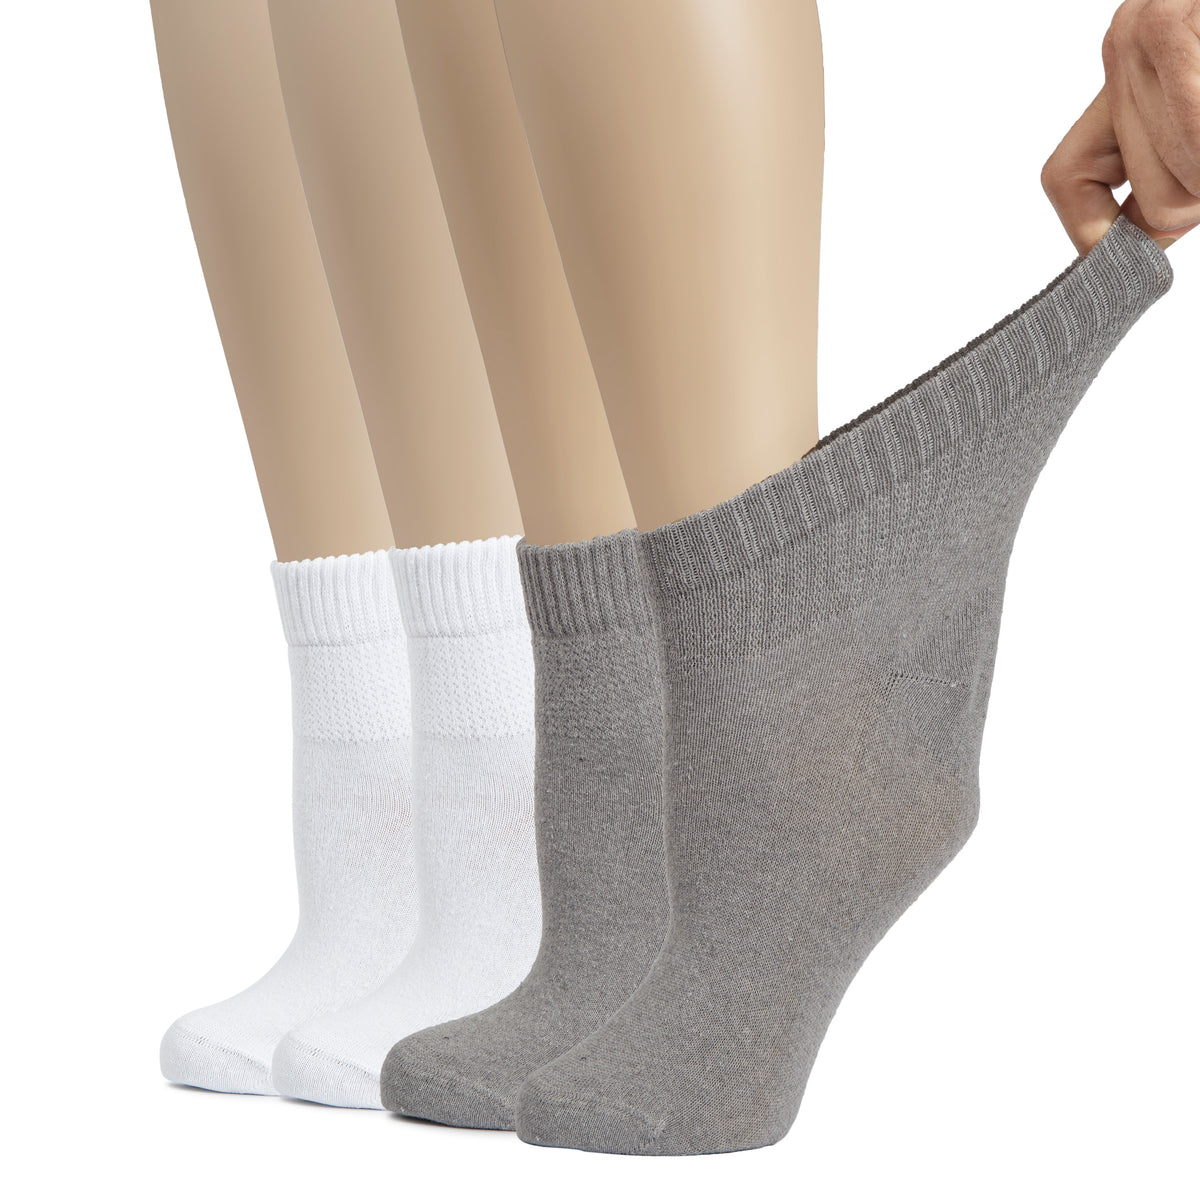 Hugh Ugoli Cotton Diabetic Women's Socks, Ankle Height, Loose, Wide Stretchy, Thin, Seamless Toe and Non-Binding Top, 4 Pairs | Shoe Size: 6-9 | IndigoBlue / LightGrey